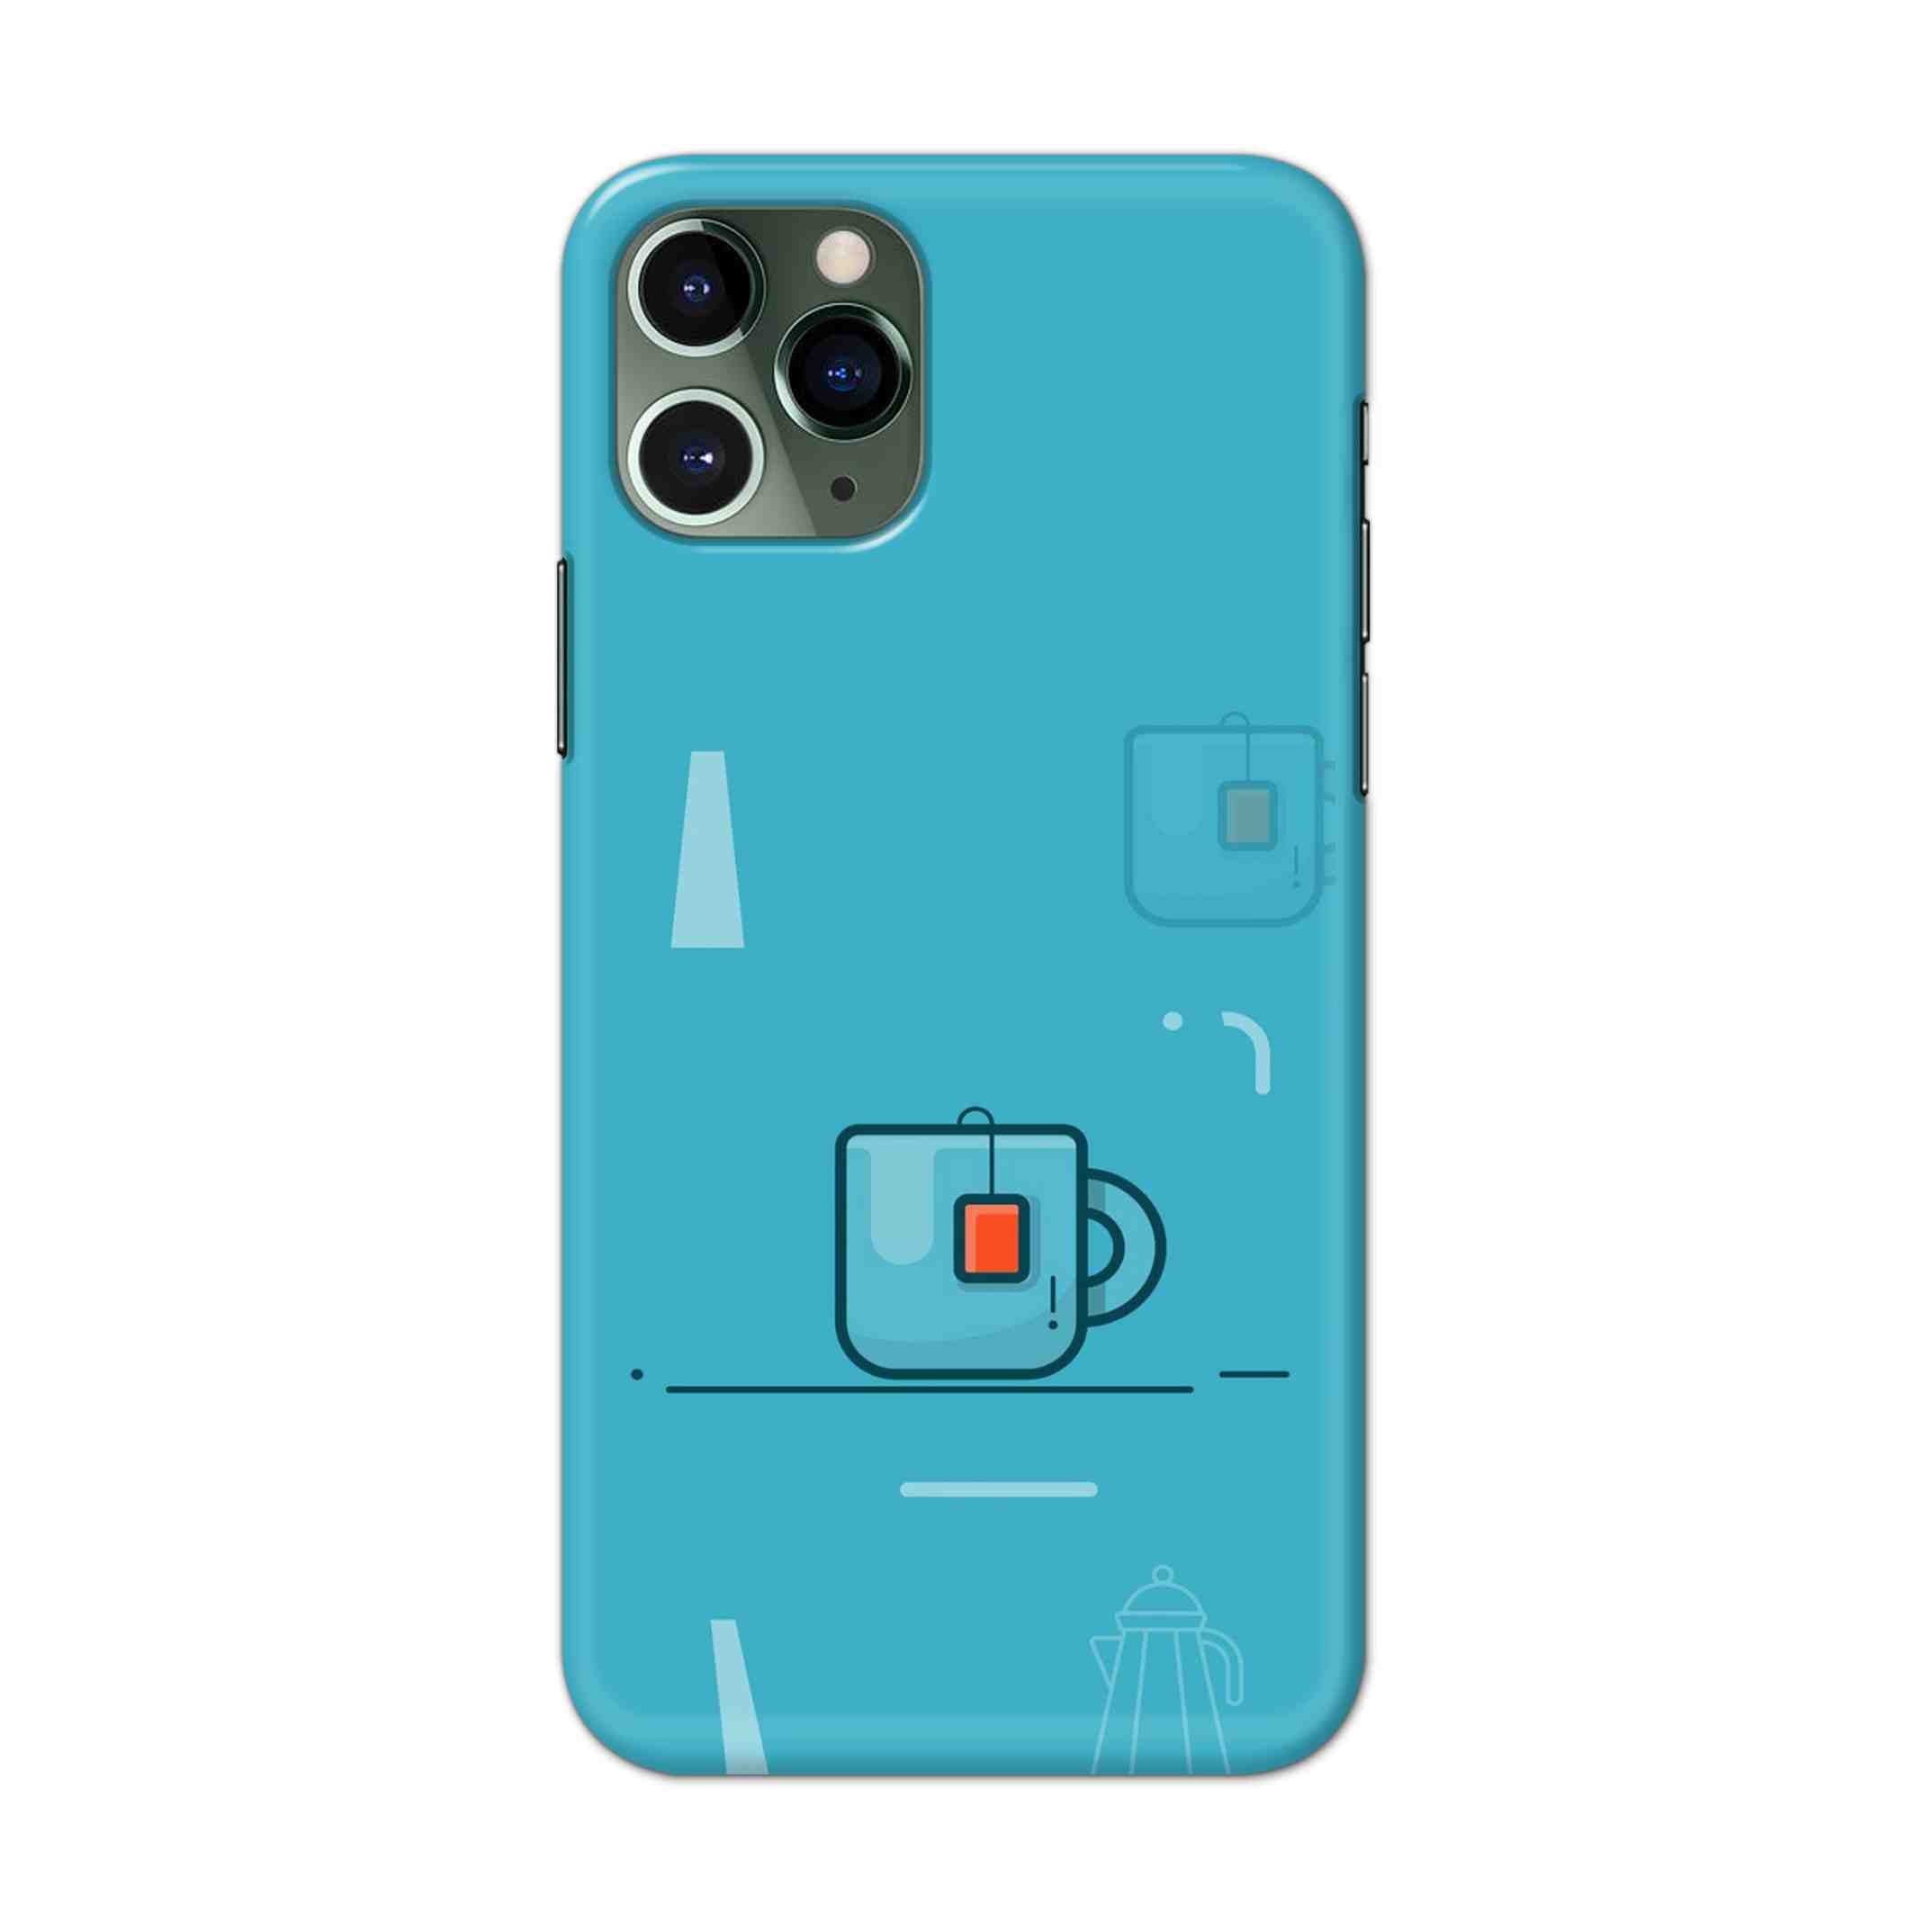 Buy Green Tea Hard Back Mobile Phone Case/Cover For iPhone 11 Pro Online